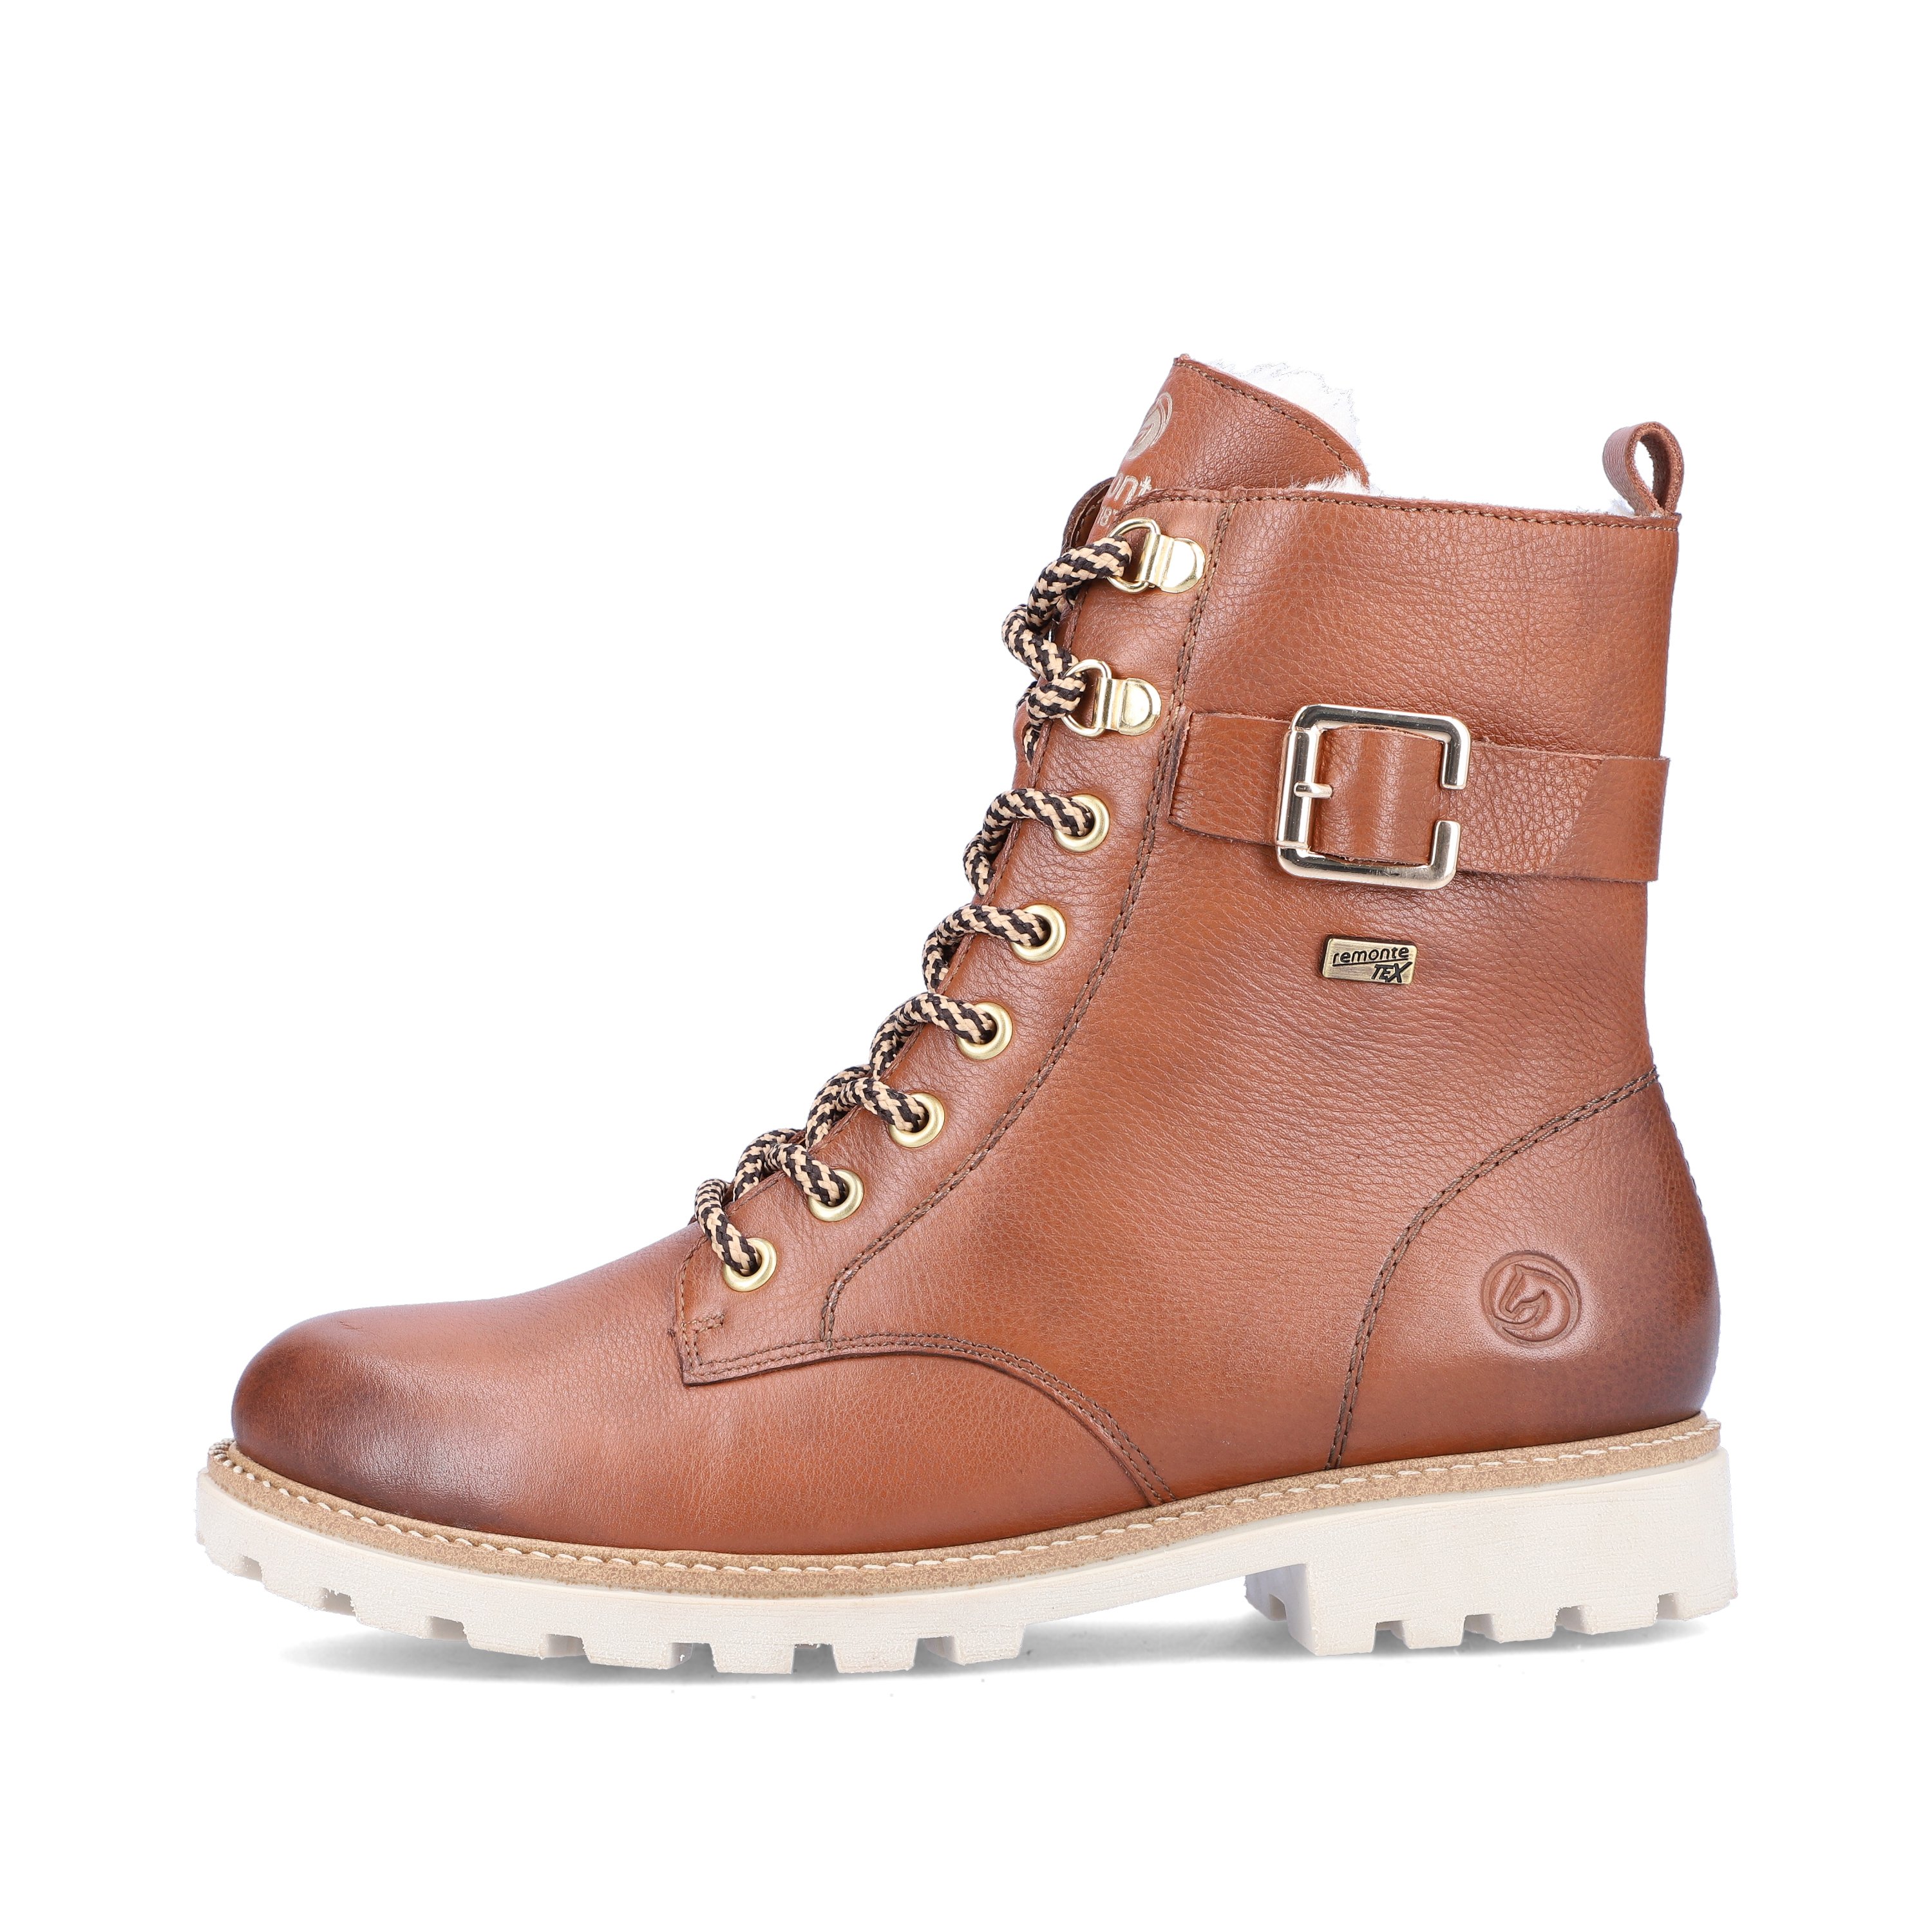 Mocha brown remonte women´s lace-up boots D8475-24 with cushioning profile sole. The outside of the shoe